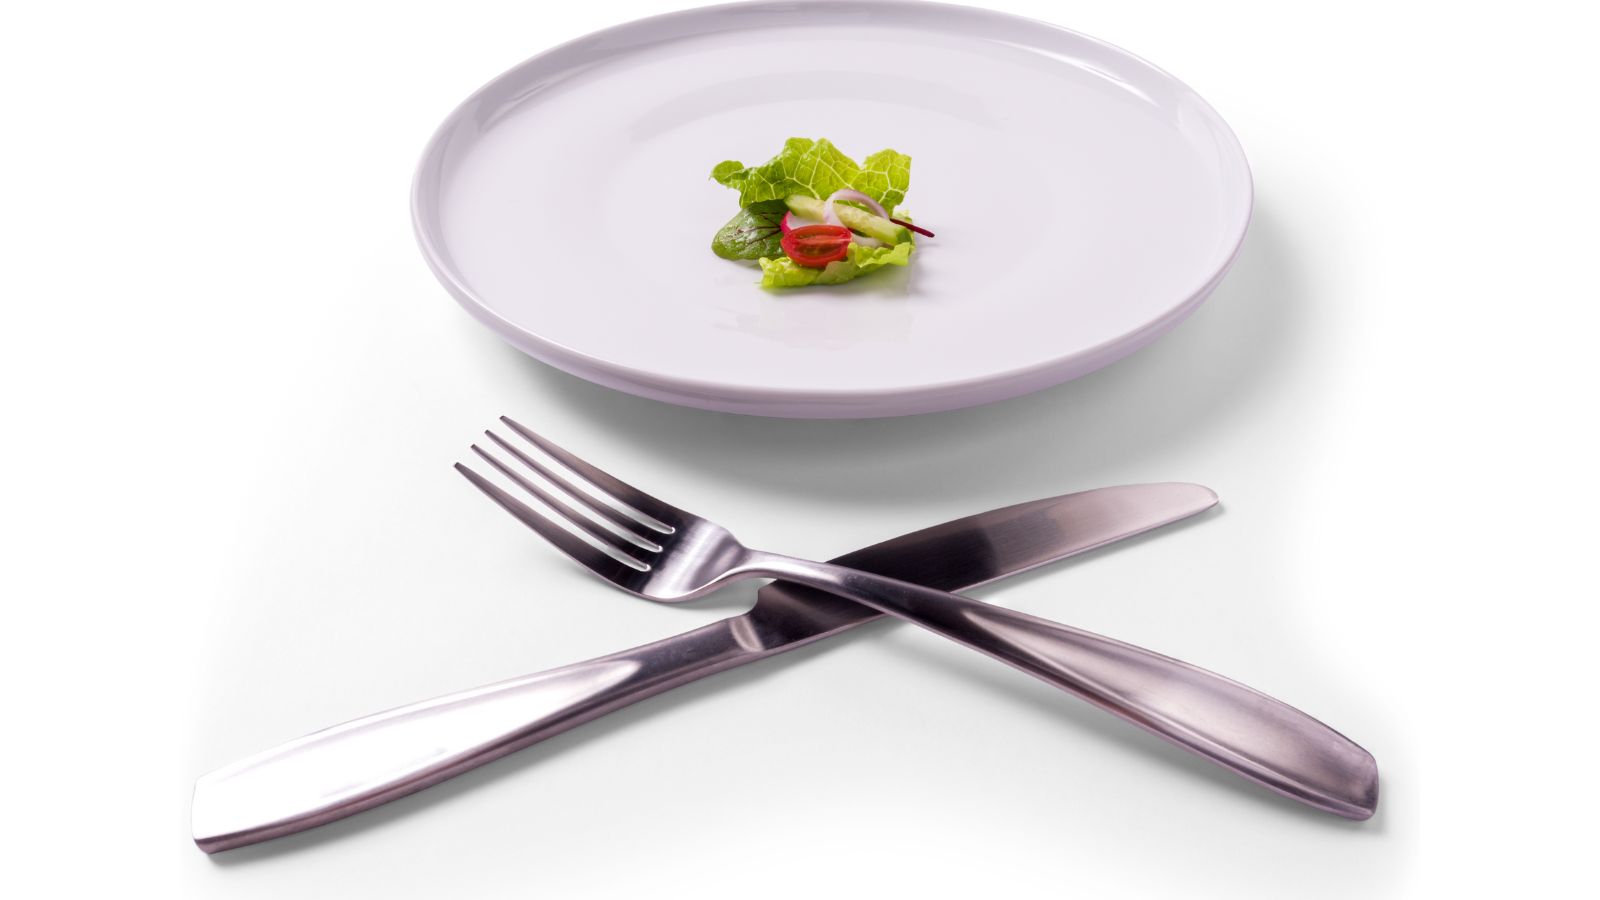 a plate with a small leafy vegetable on it next to a knife and fork